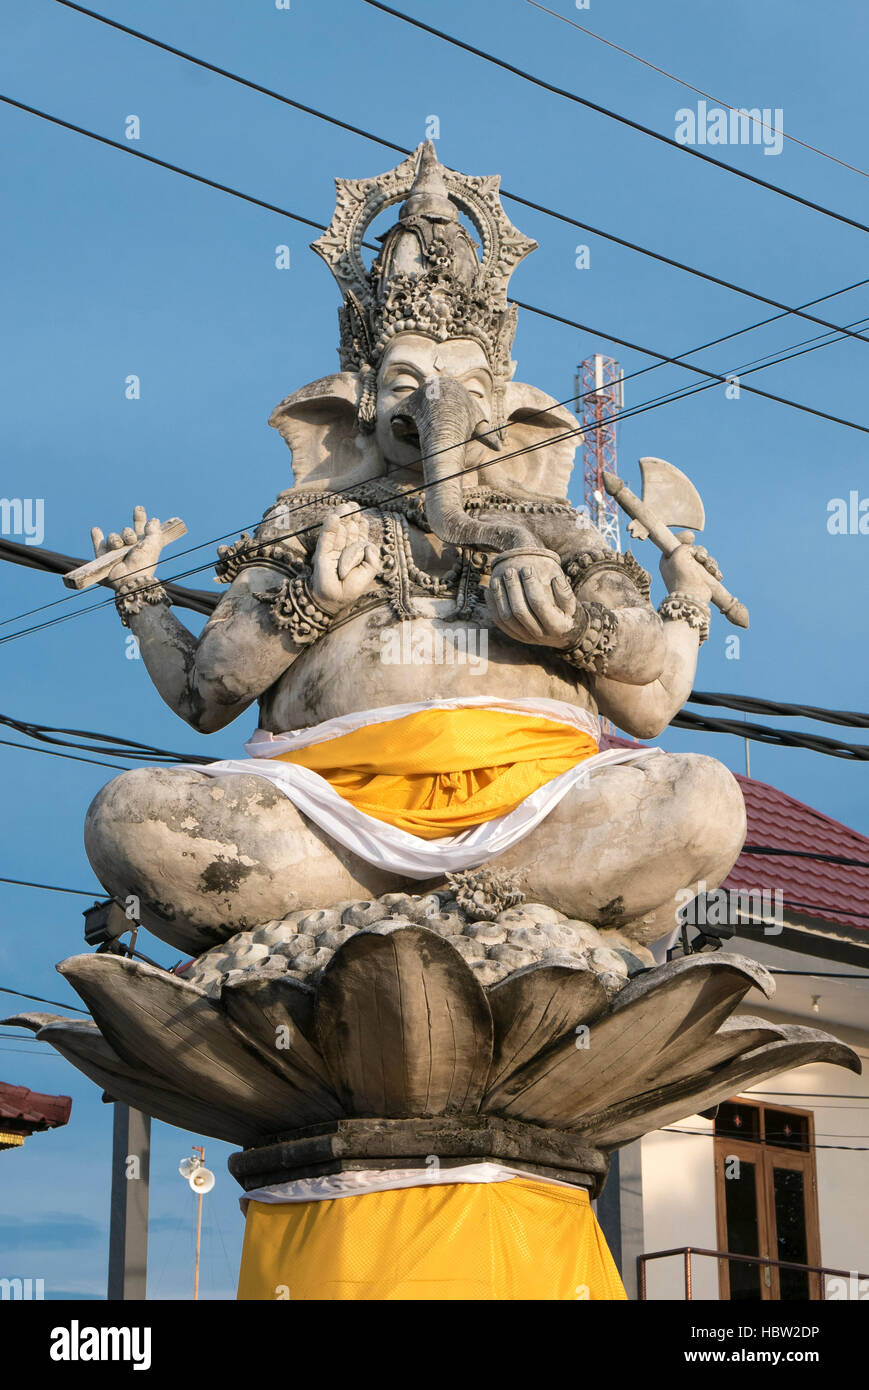 Massive statue of Ganesh in small city in Bali with electrical wires. Indonesia Stock Photo